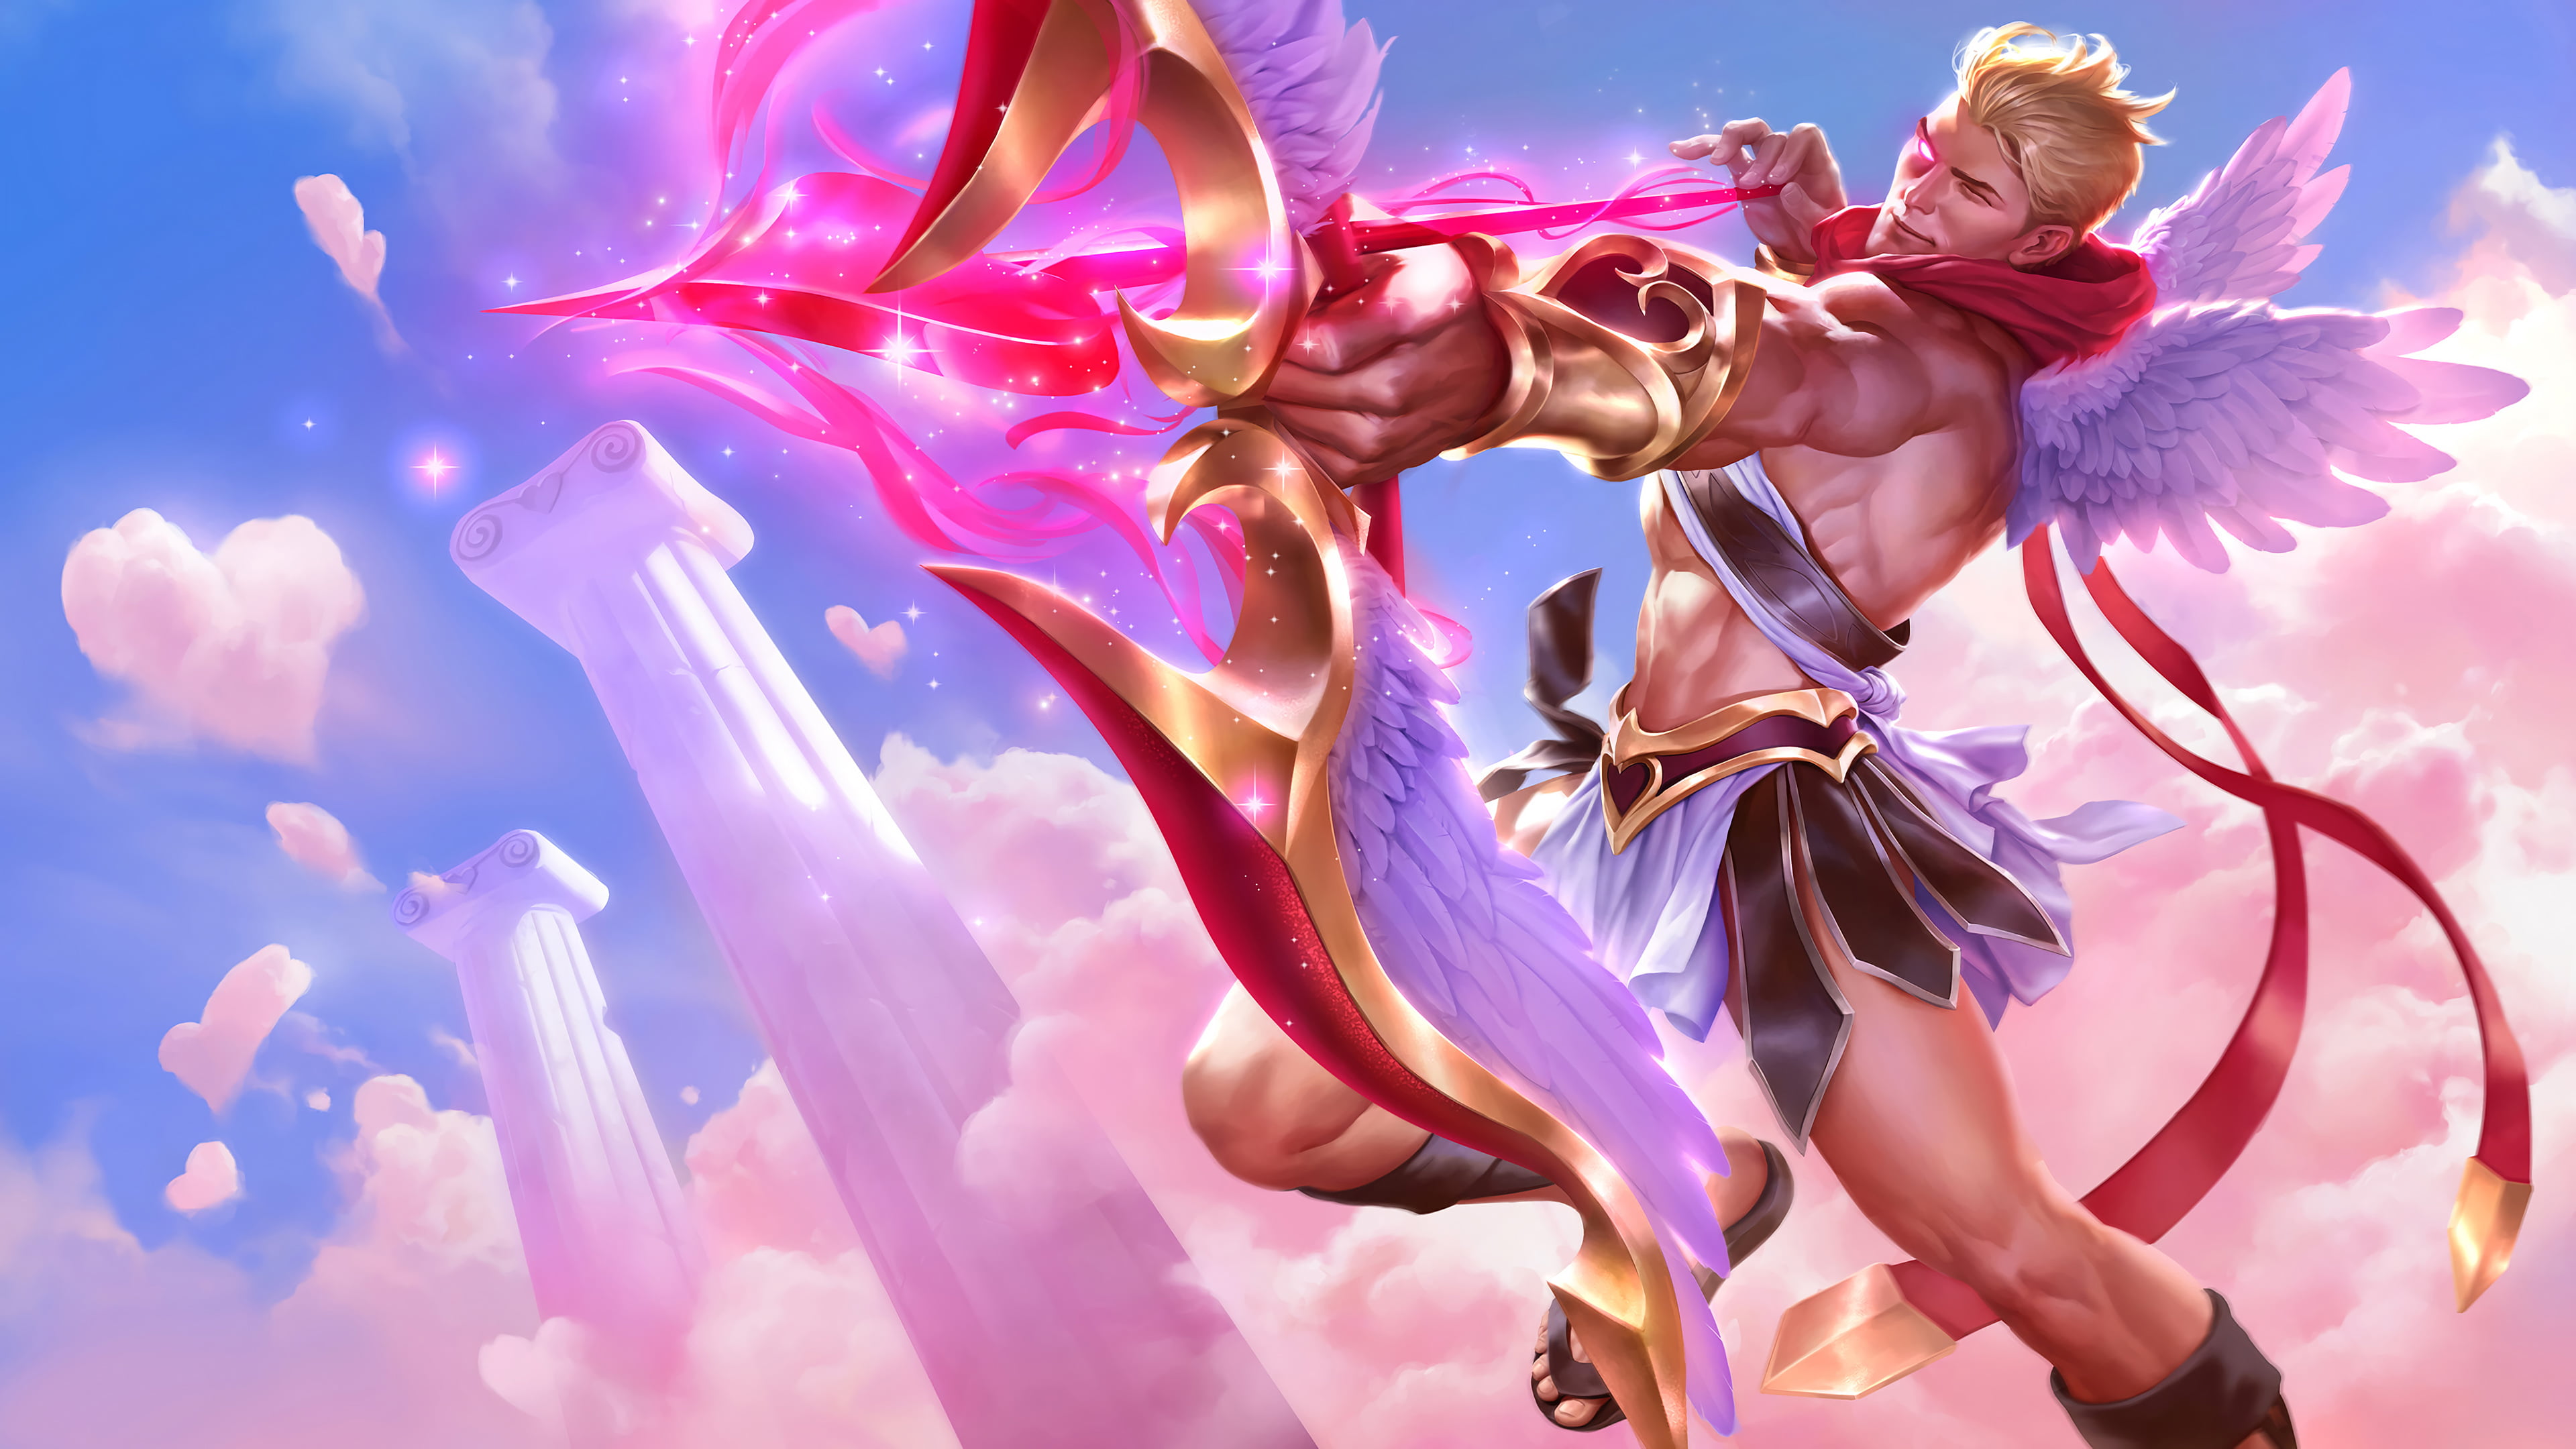 Heartseeker Varus Quin Love Arrow Heart Video Game League Of Legends Skin Hd Wallpaper For Mobile Phones Tablet And Pc 3840×2160